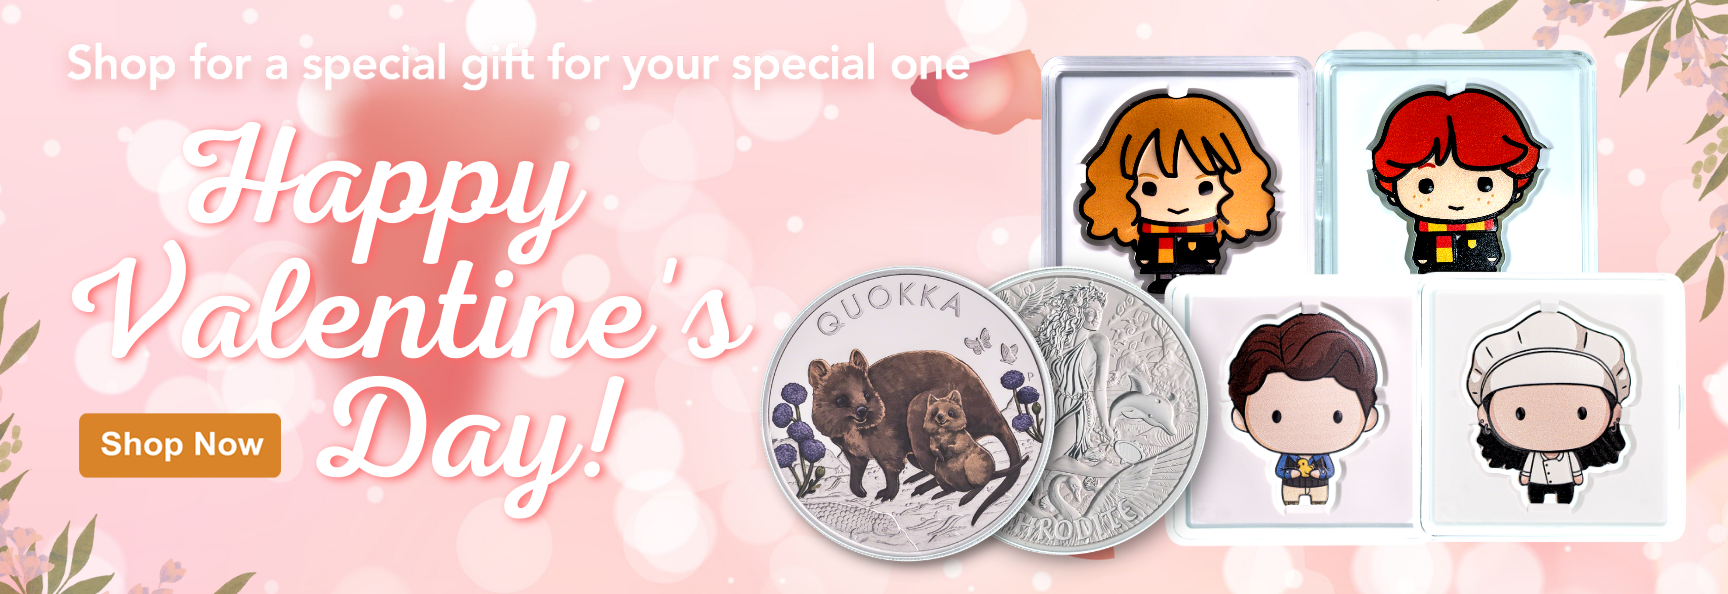 Happy Valentine's Day - Shop for a special gift for your special one